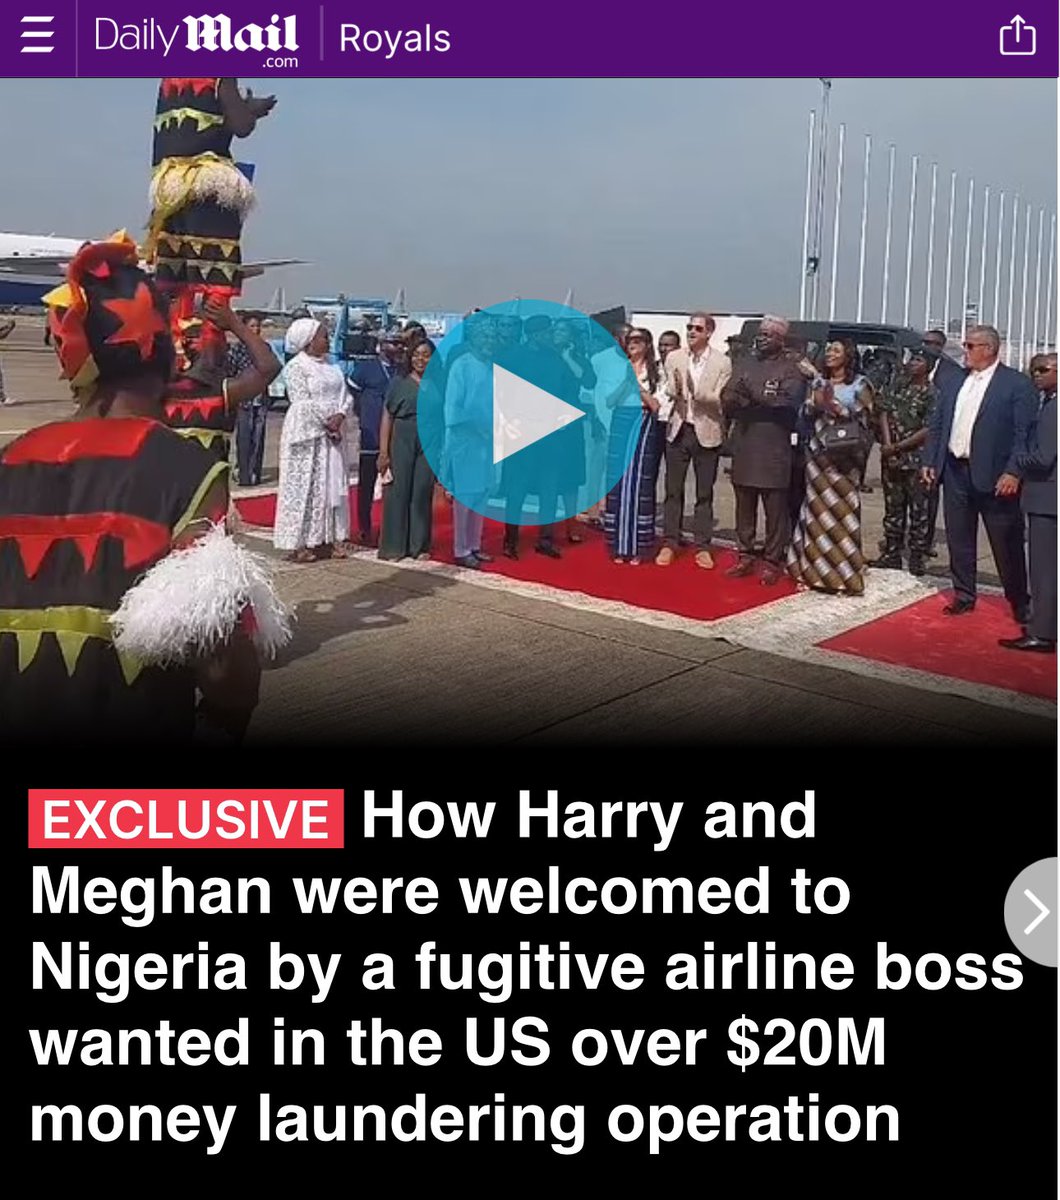 Good to know it’s only taken 3 days for the DailyMail to catch up Meghan & Harry love associating themselves with fugitives who launder money